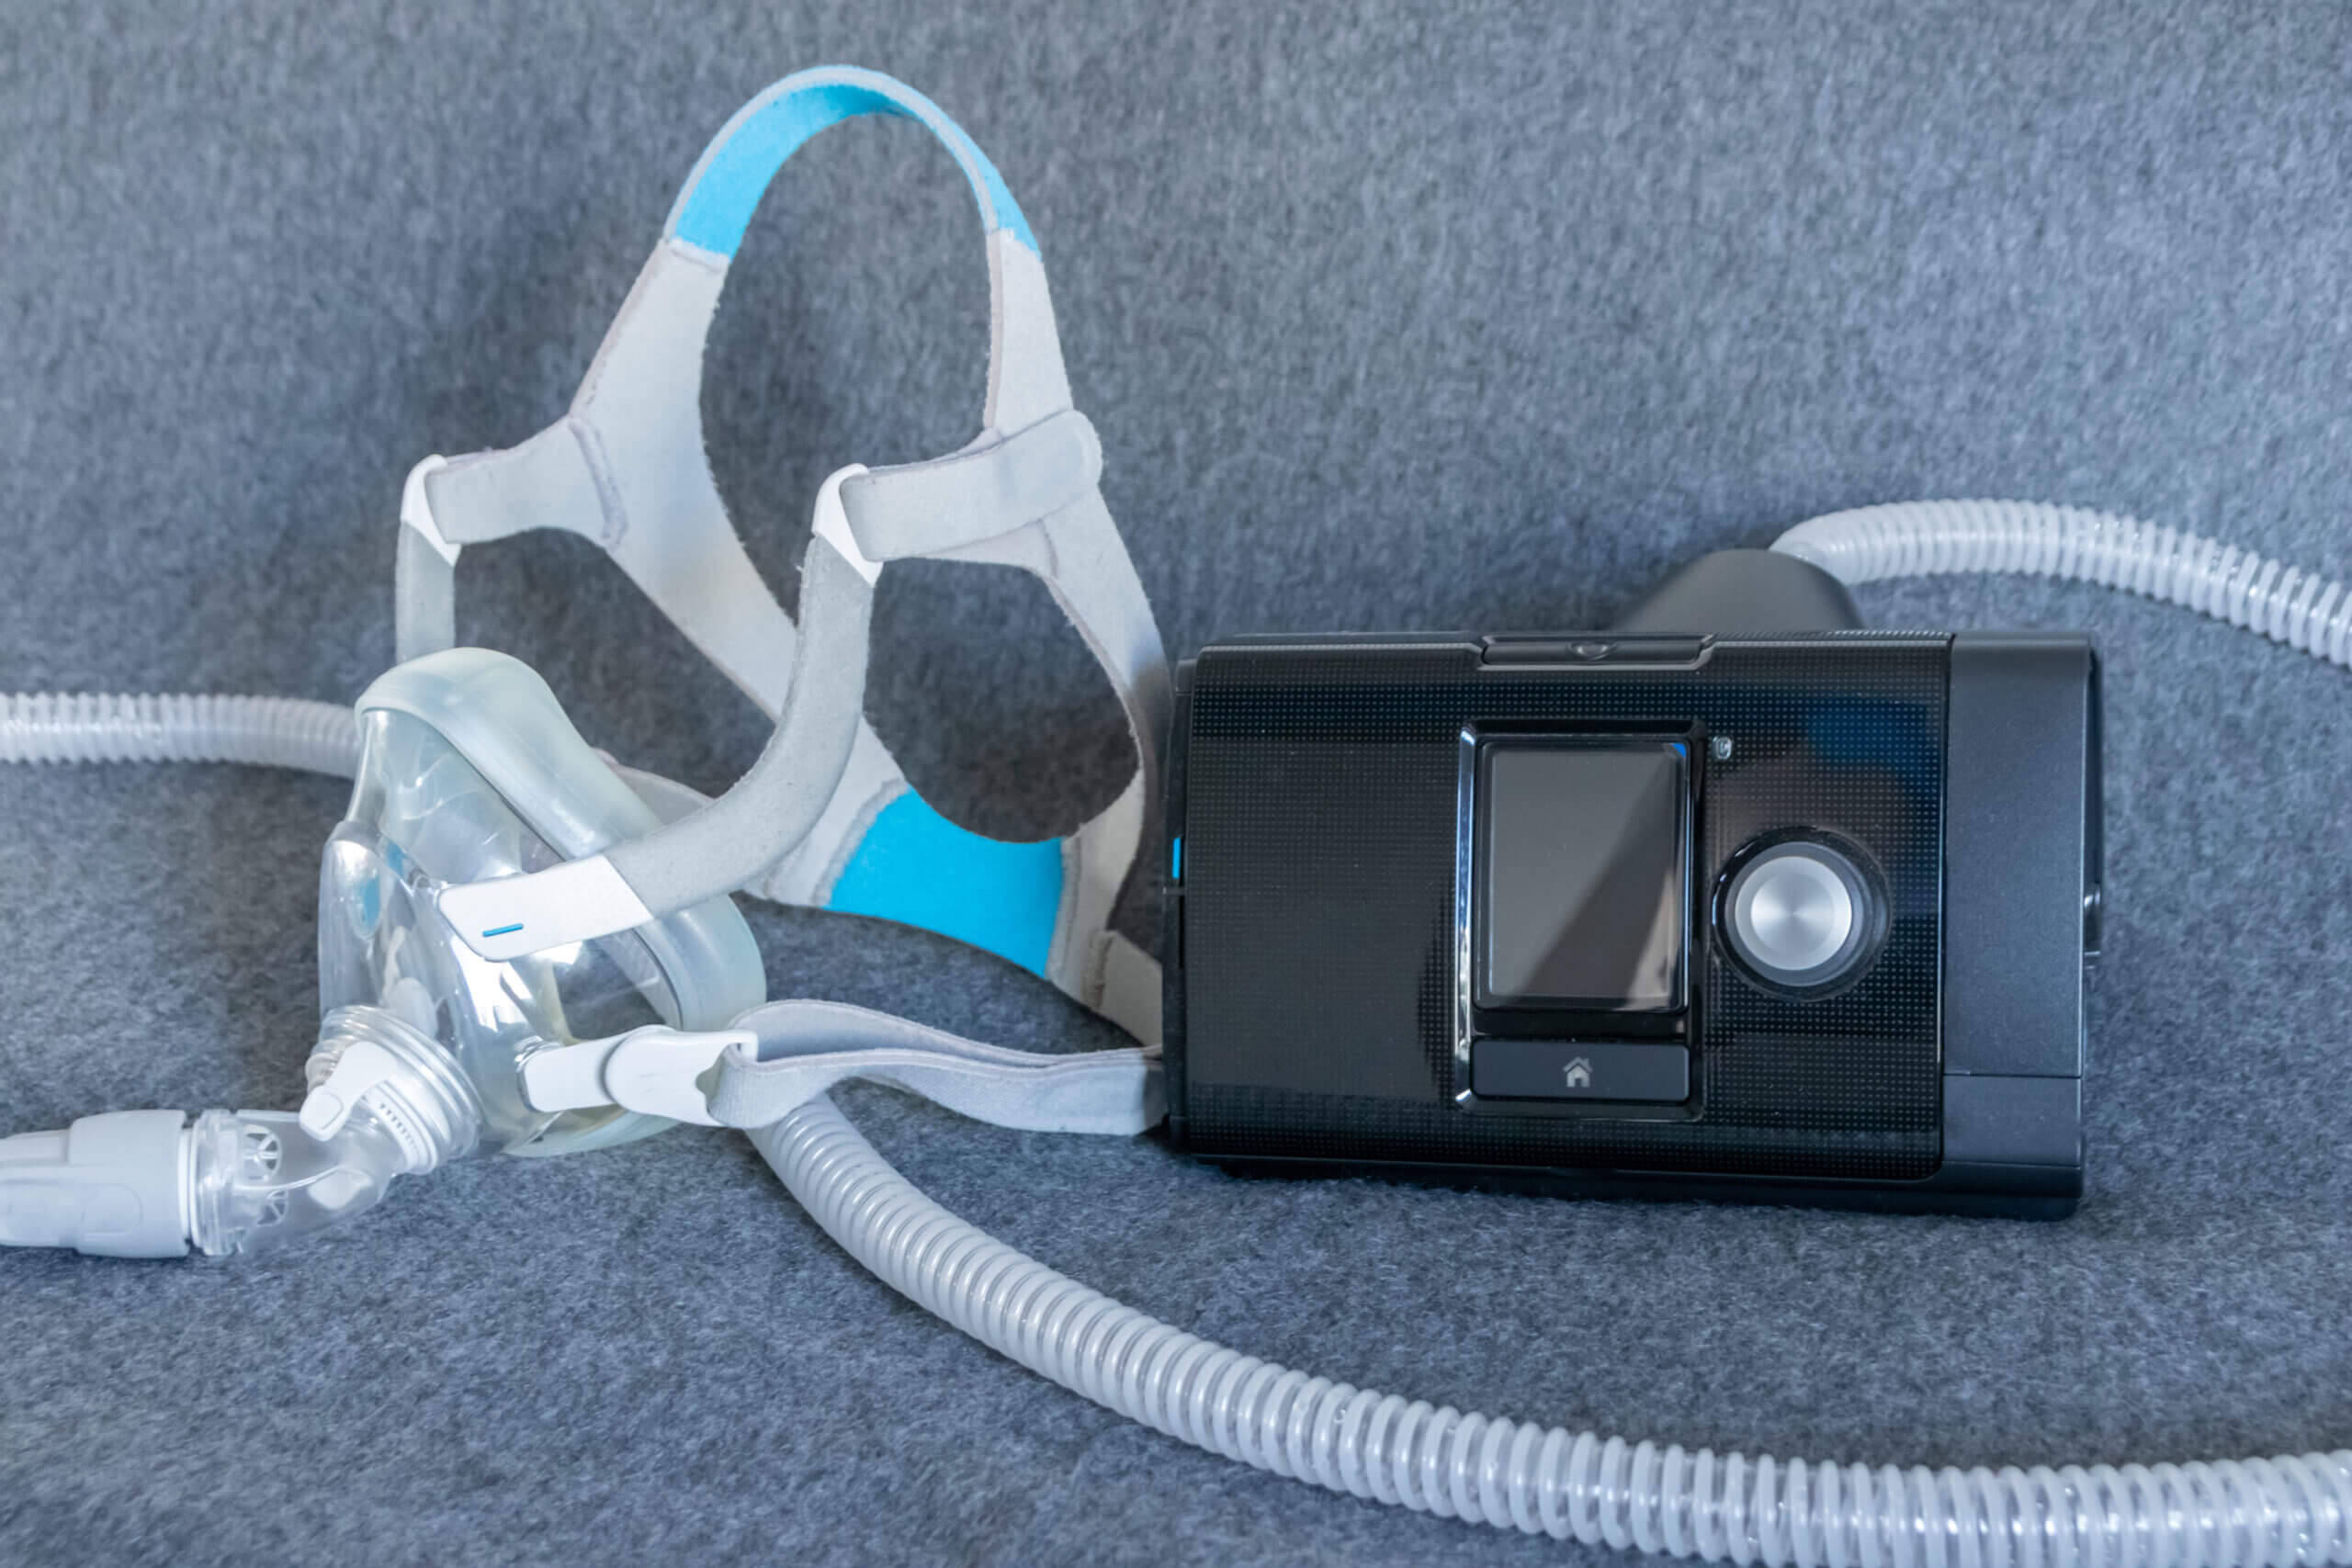 Empowering Respiratory Health: Unveiling the ResMed AirMini Advantage